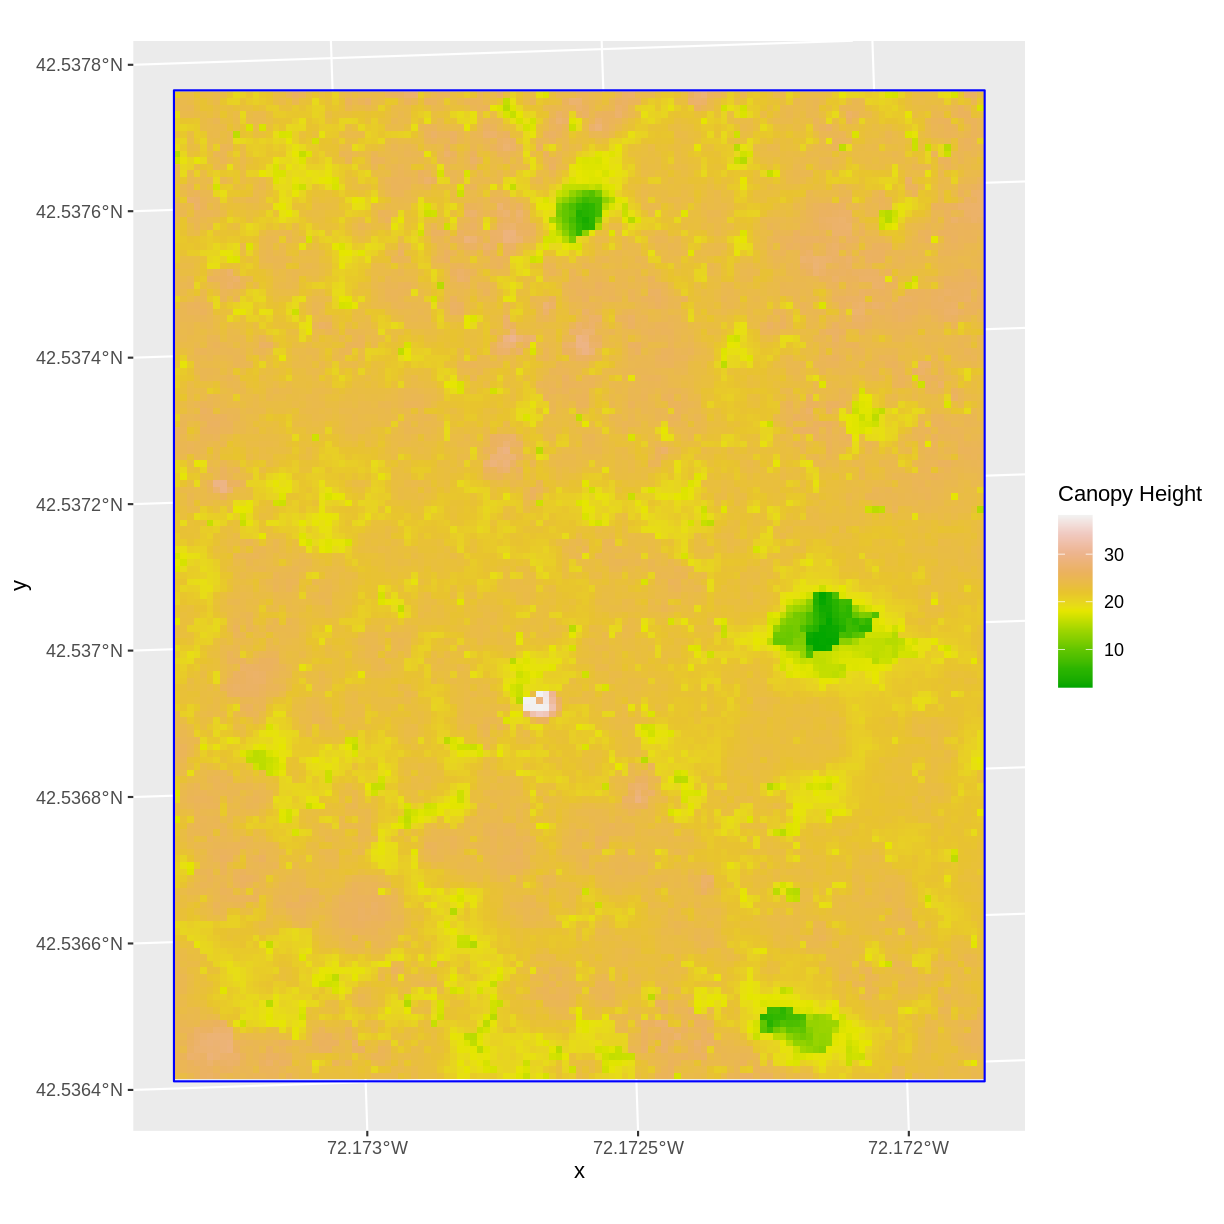 plot of chunk view-crop-extent